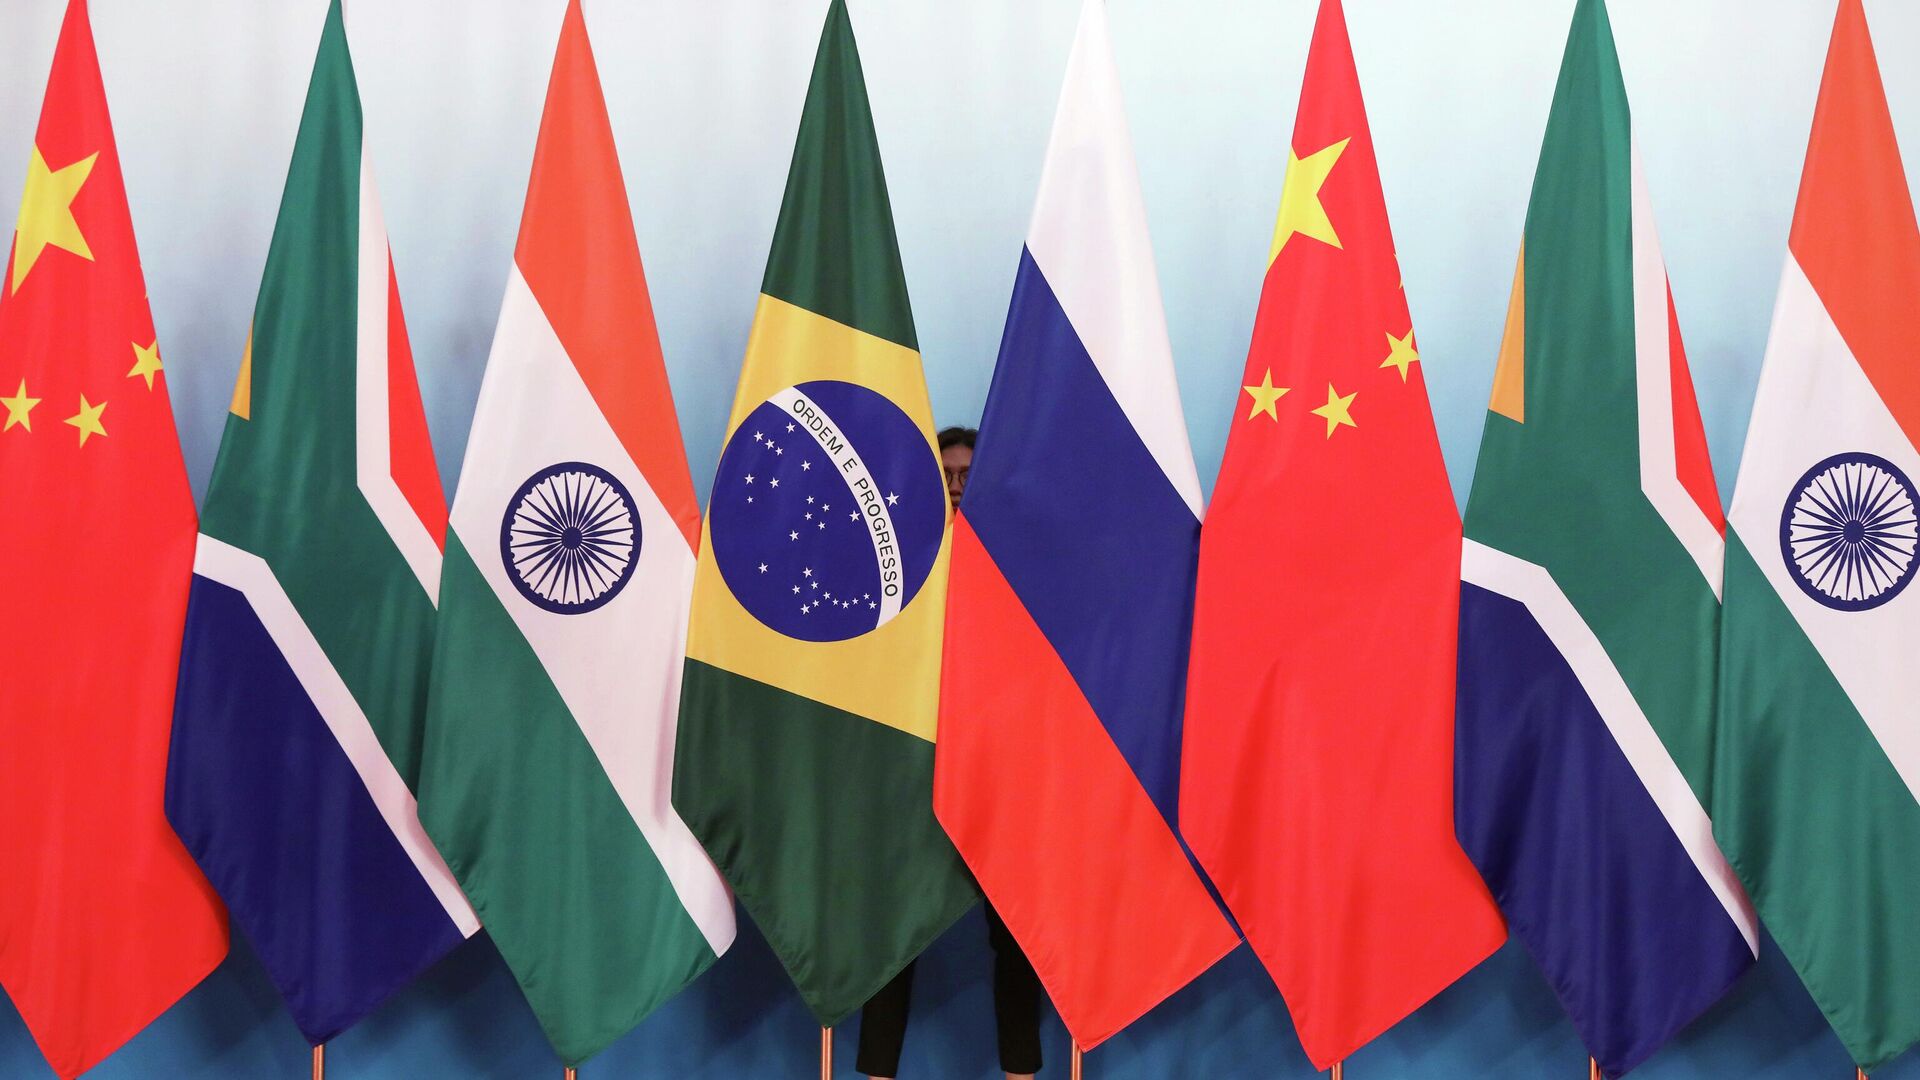 Staff worker stands behind national flags of Brazil, Russia, China, South Africa and India to tidy the flags ahead of a group photo during the BRICS Summit at the Xiamen International Conference and Exhibition Center in Xiamen, southeastern China's Fujian Province, Monday, Sept. 4, 2017. - Sputnik International, 1920, 28.11.2022